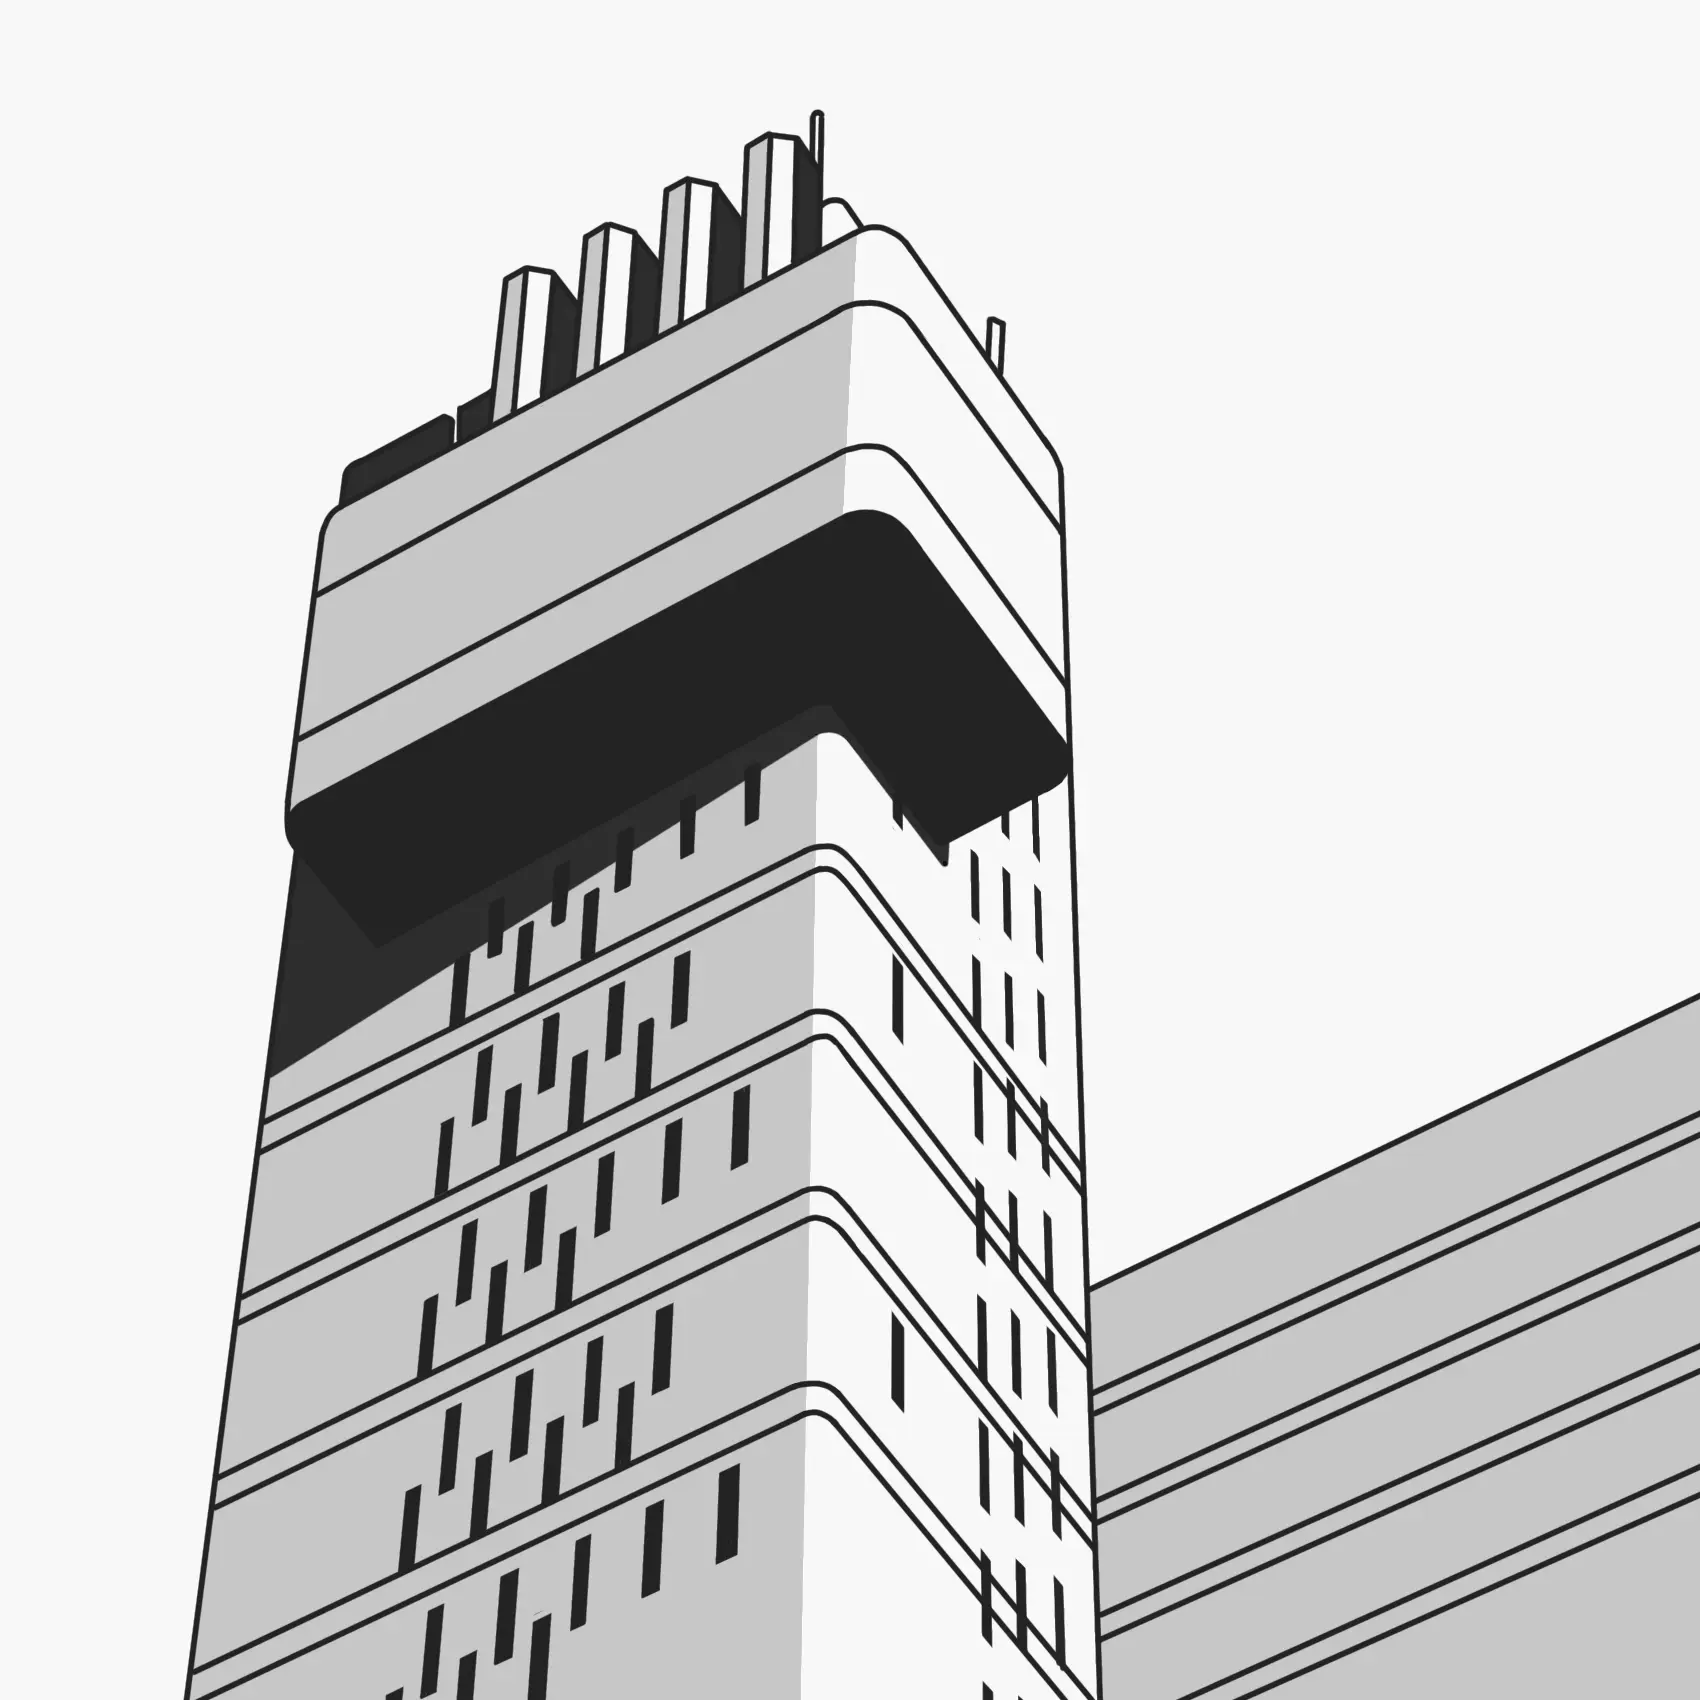 Minimalist drawing of a brutalist building in black and white